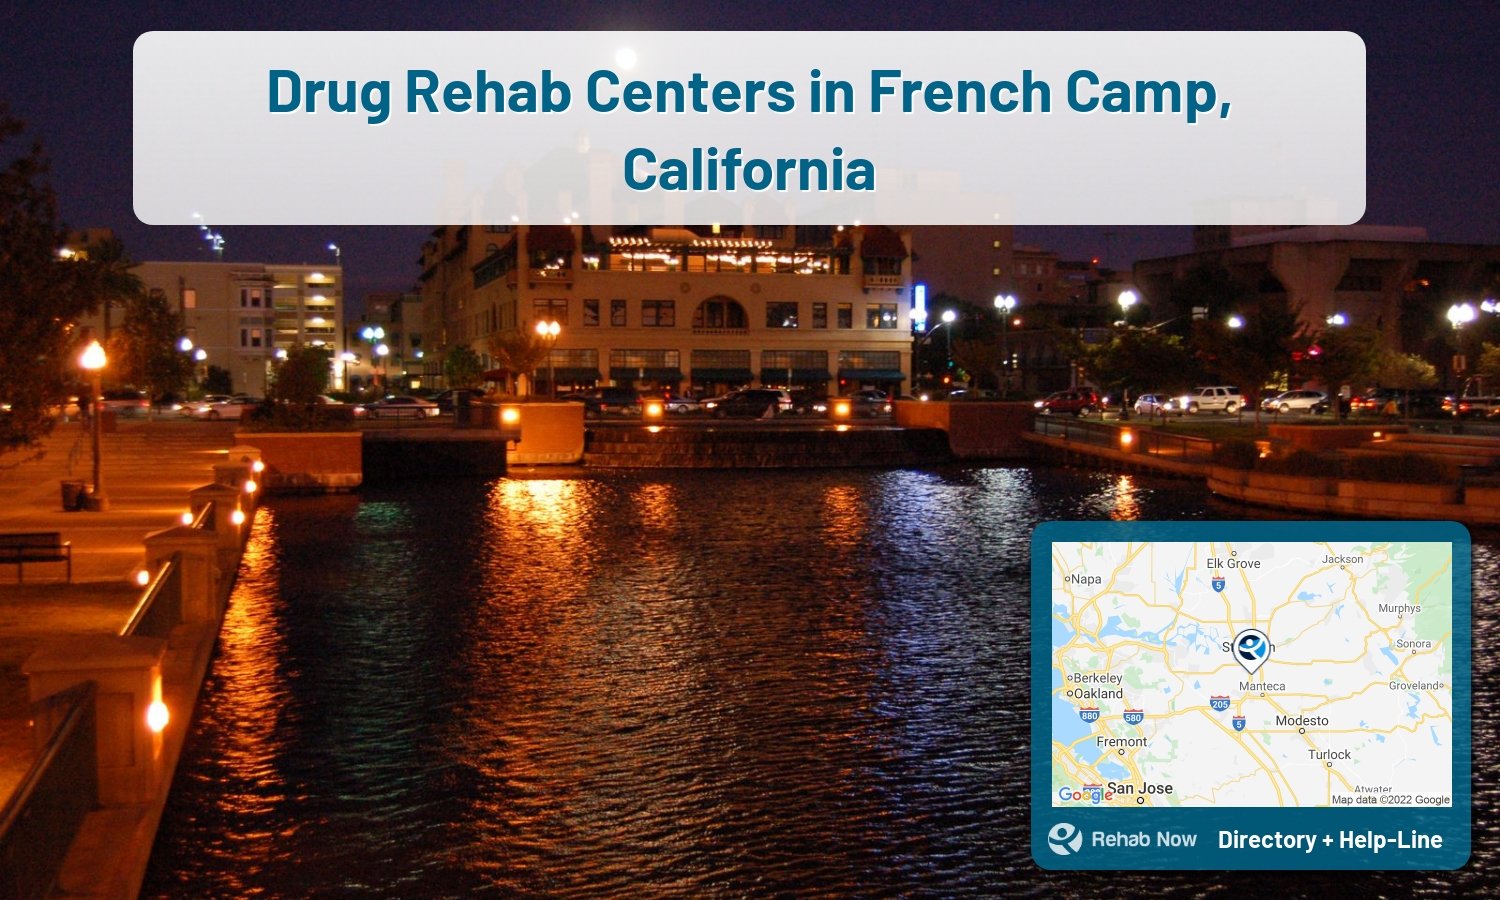 View options, availability, treatment methods, and more, for drug rehab and alcohol treatment in French Camp, California